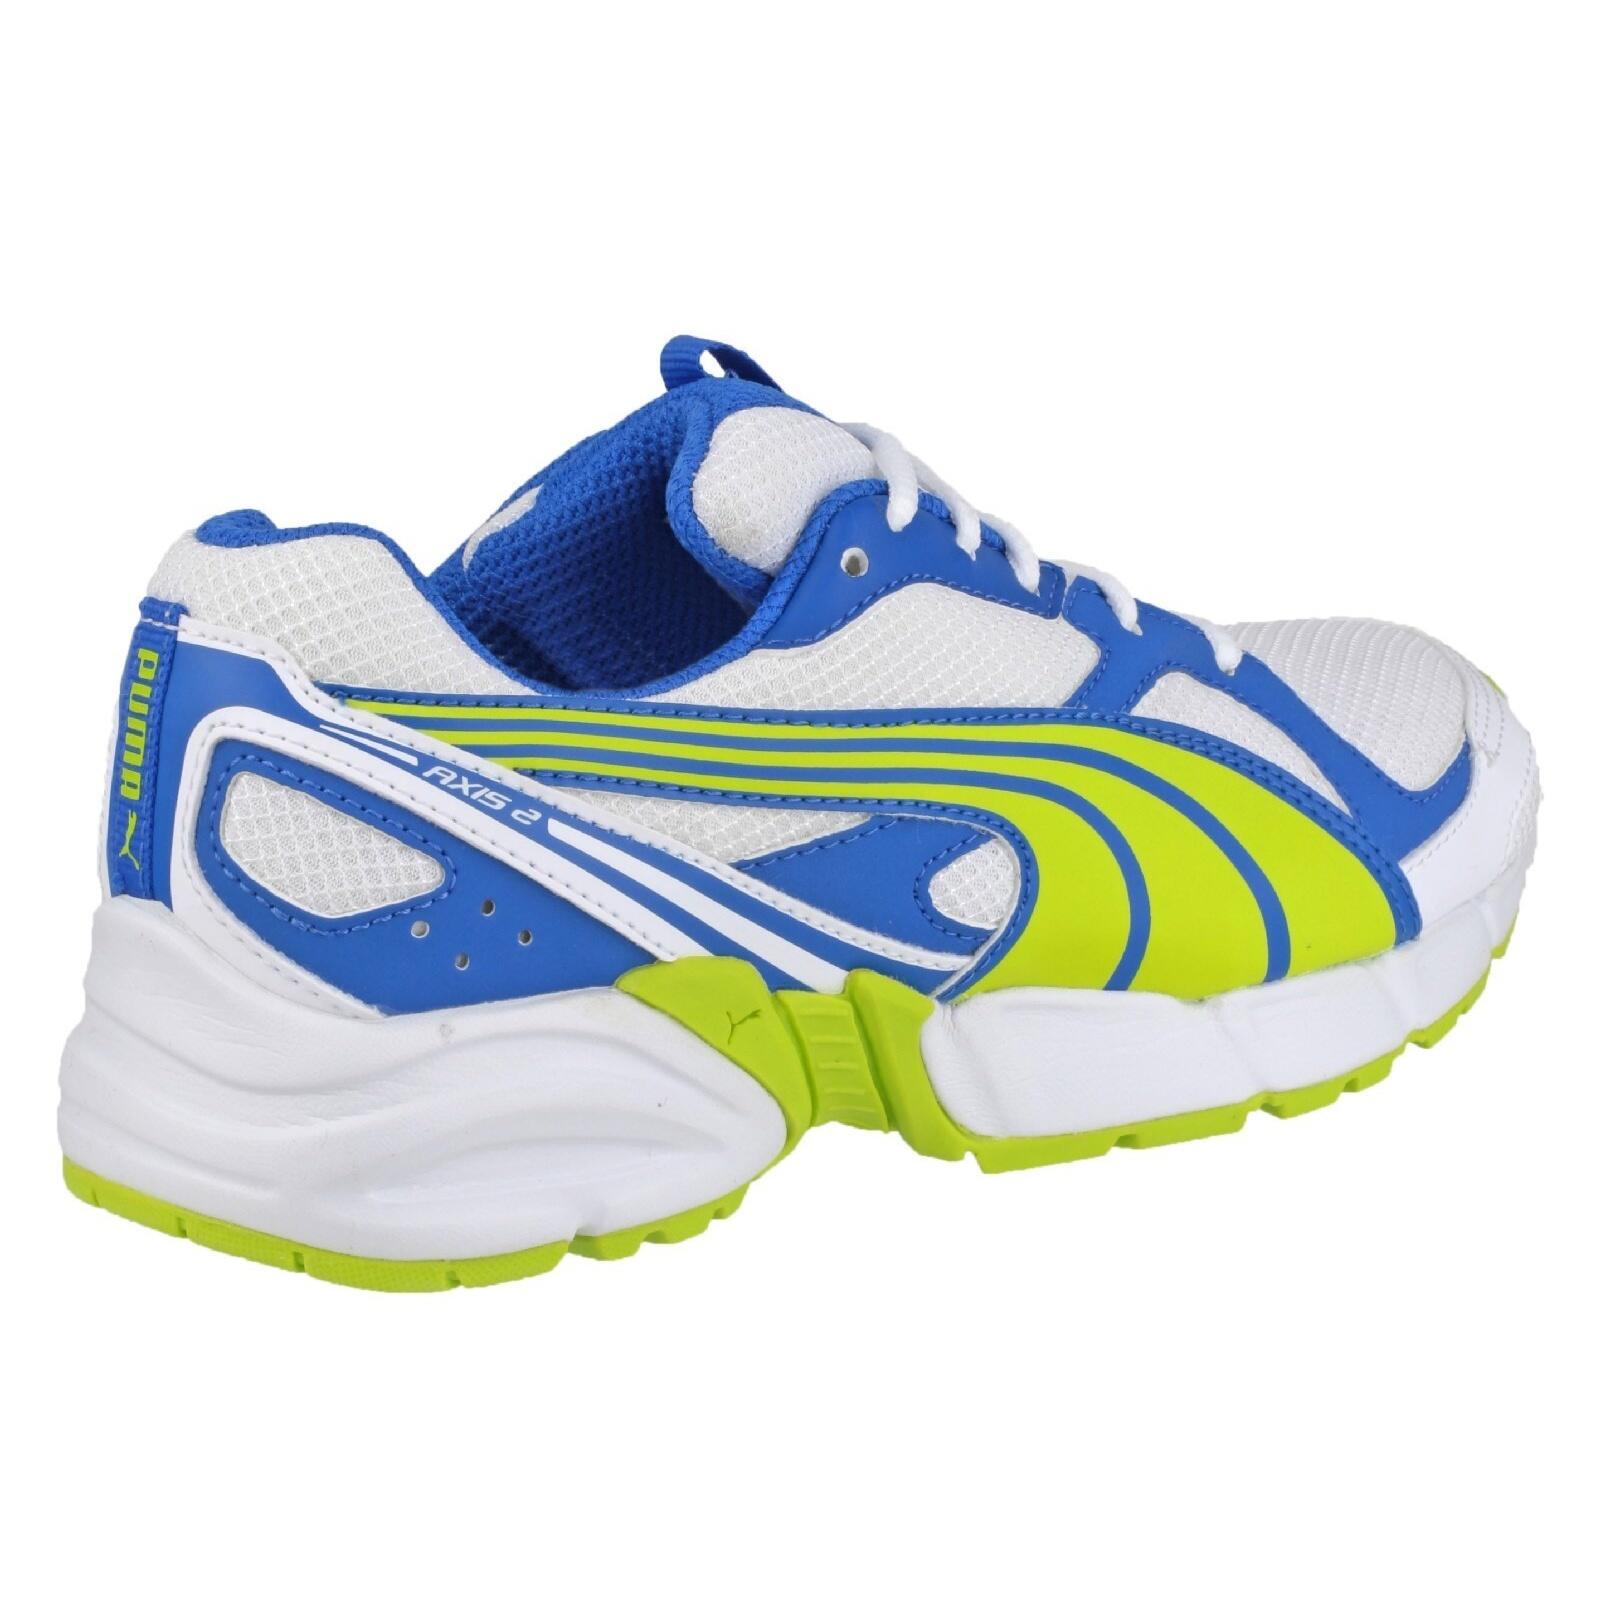 Axis Mesh V2 Lace Up Boys Trainers (Lime/Blue) 2/3